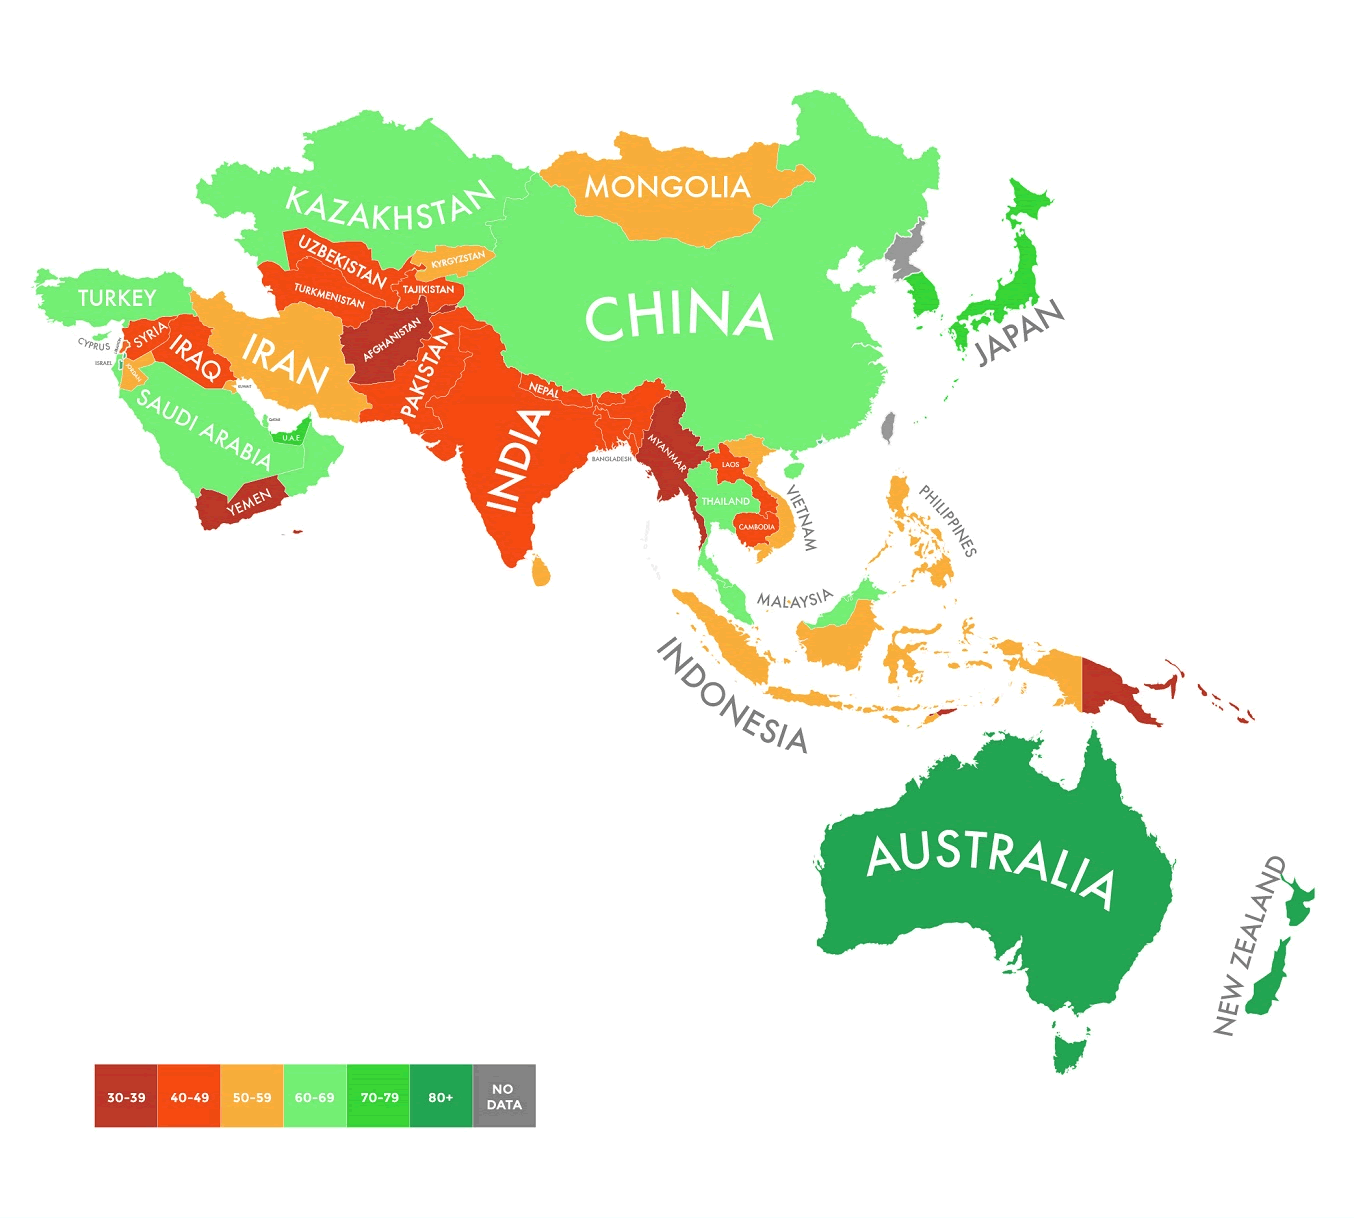 Climate change survival (Asia and Australasia)